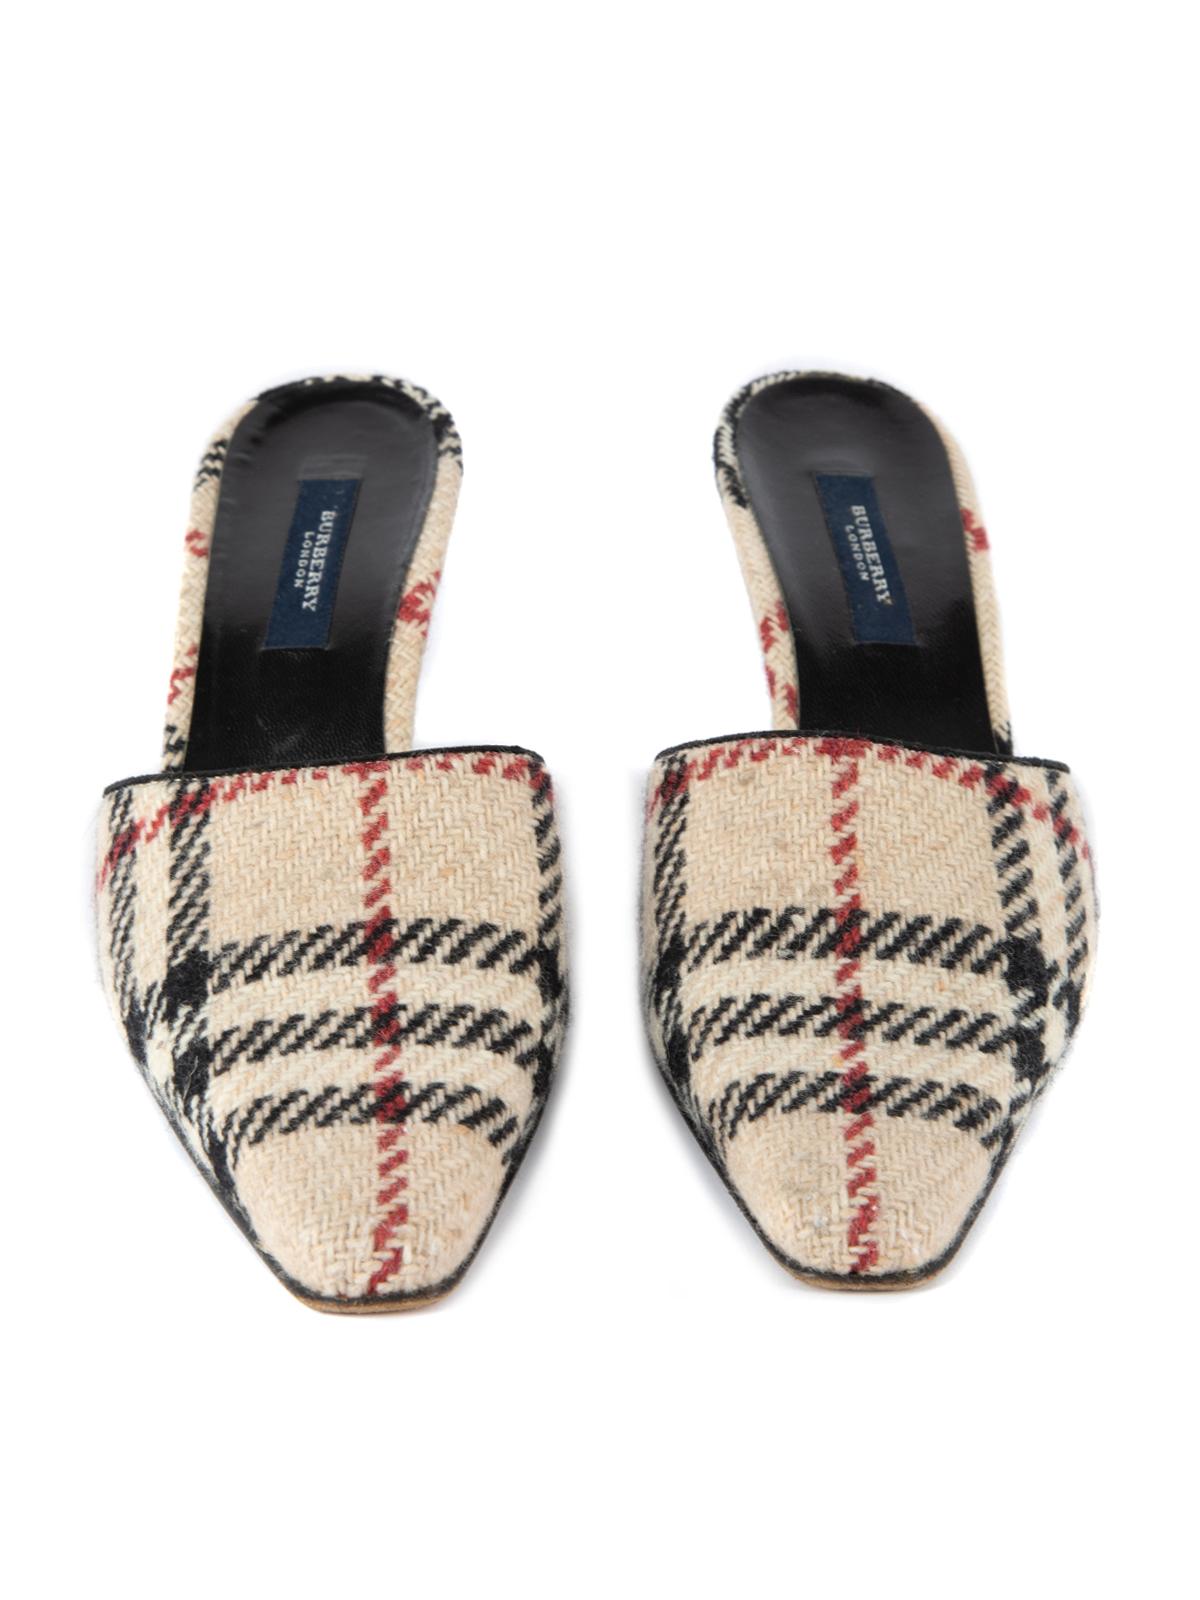 burberry mules